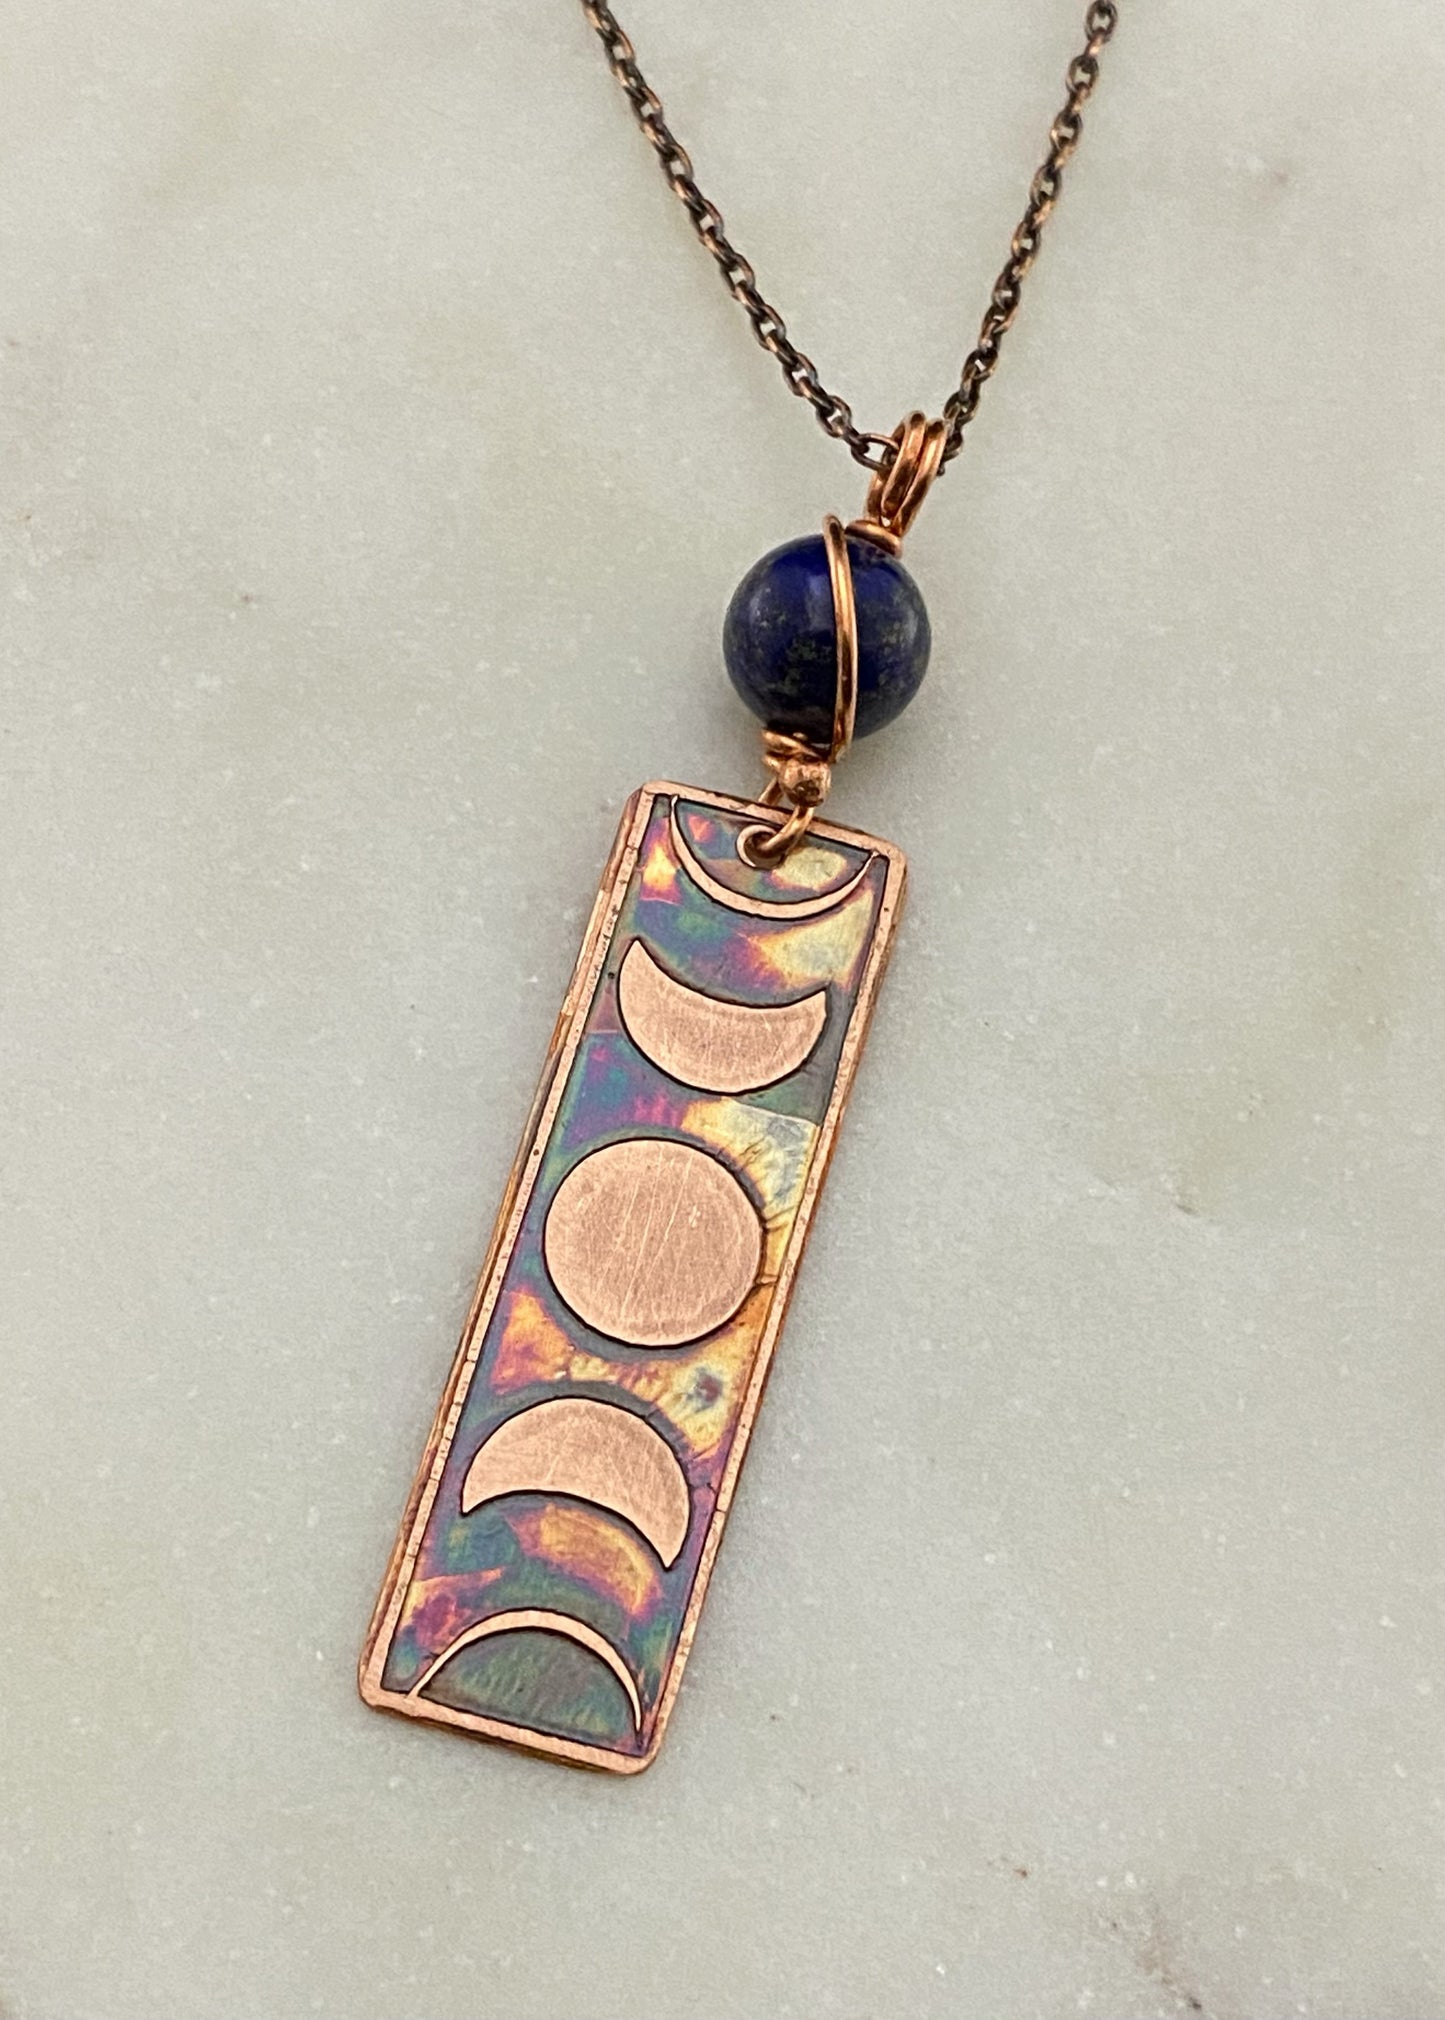 Moon phase acid etched copper necklace with lapis gemstone